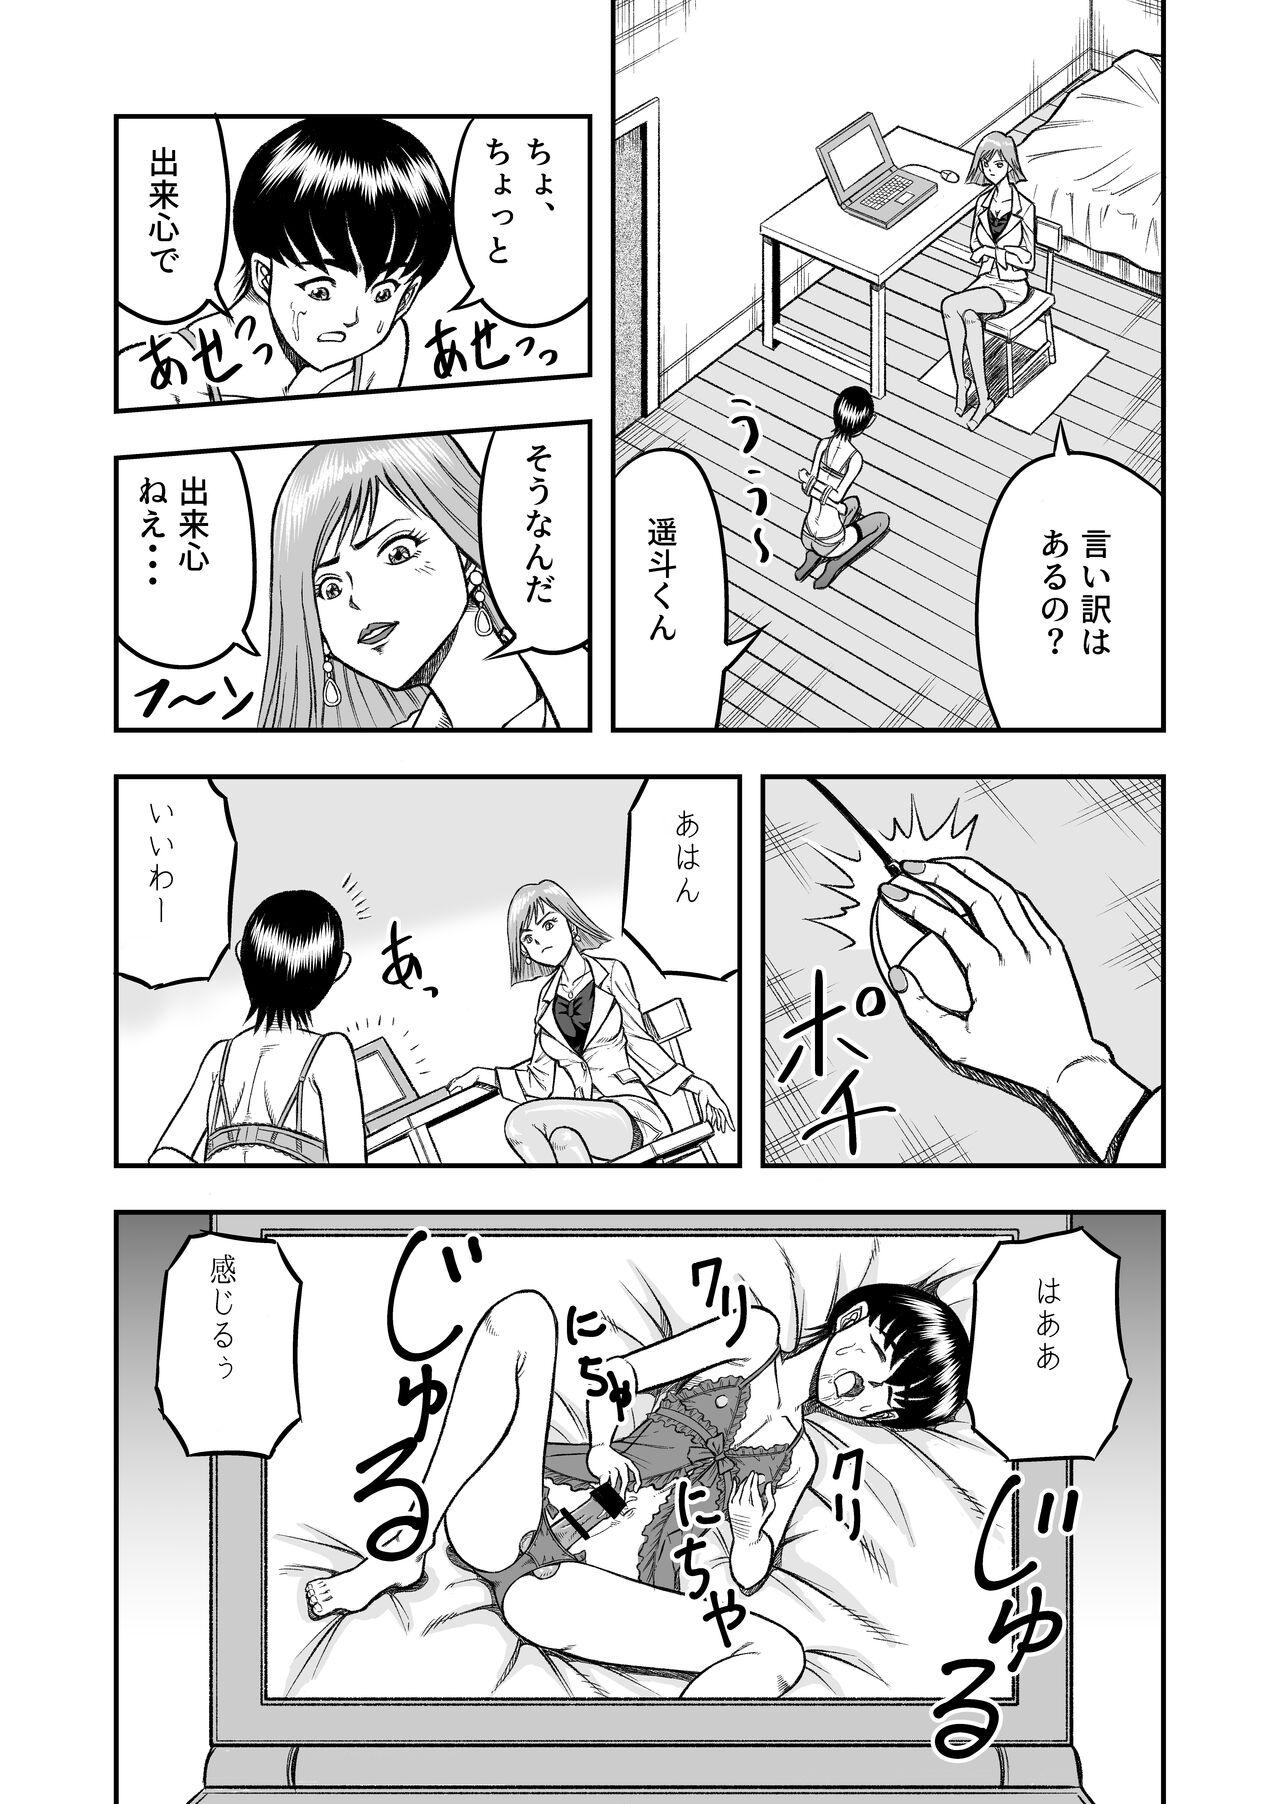 Lingerie OwnWillボクがアタシになったとき 総集編 - Original Stepfamily - Page 9